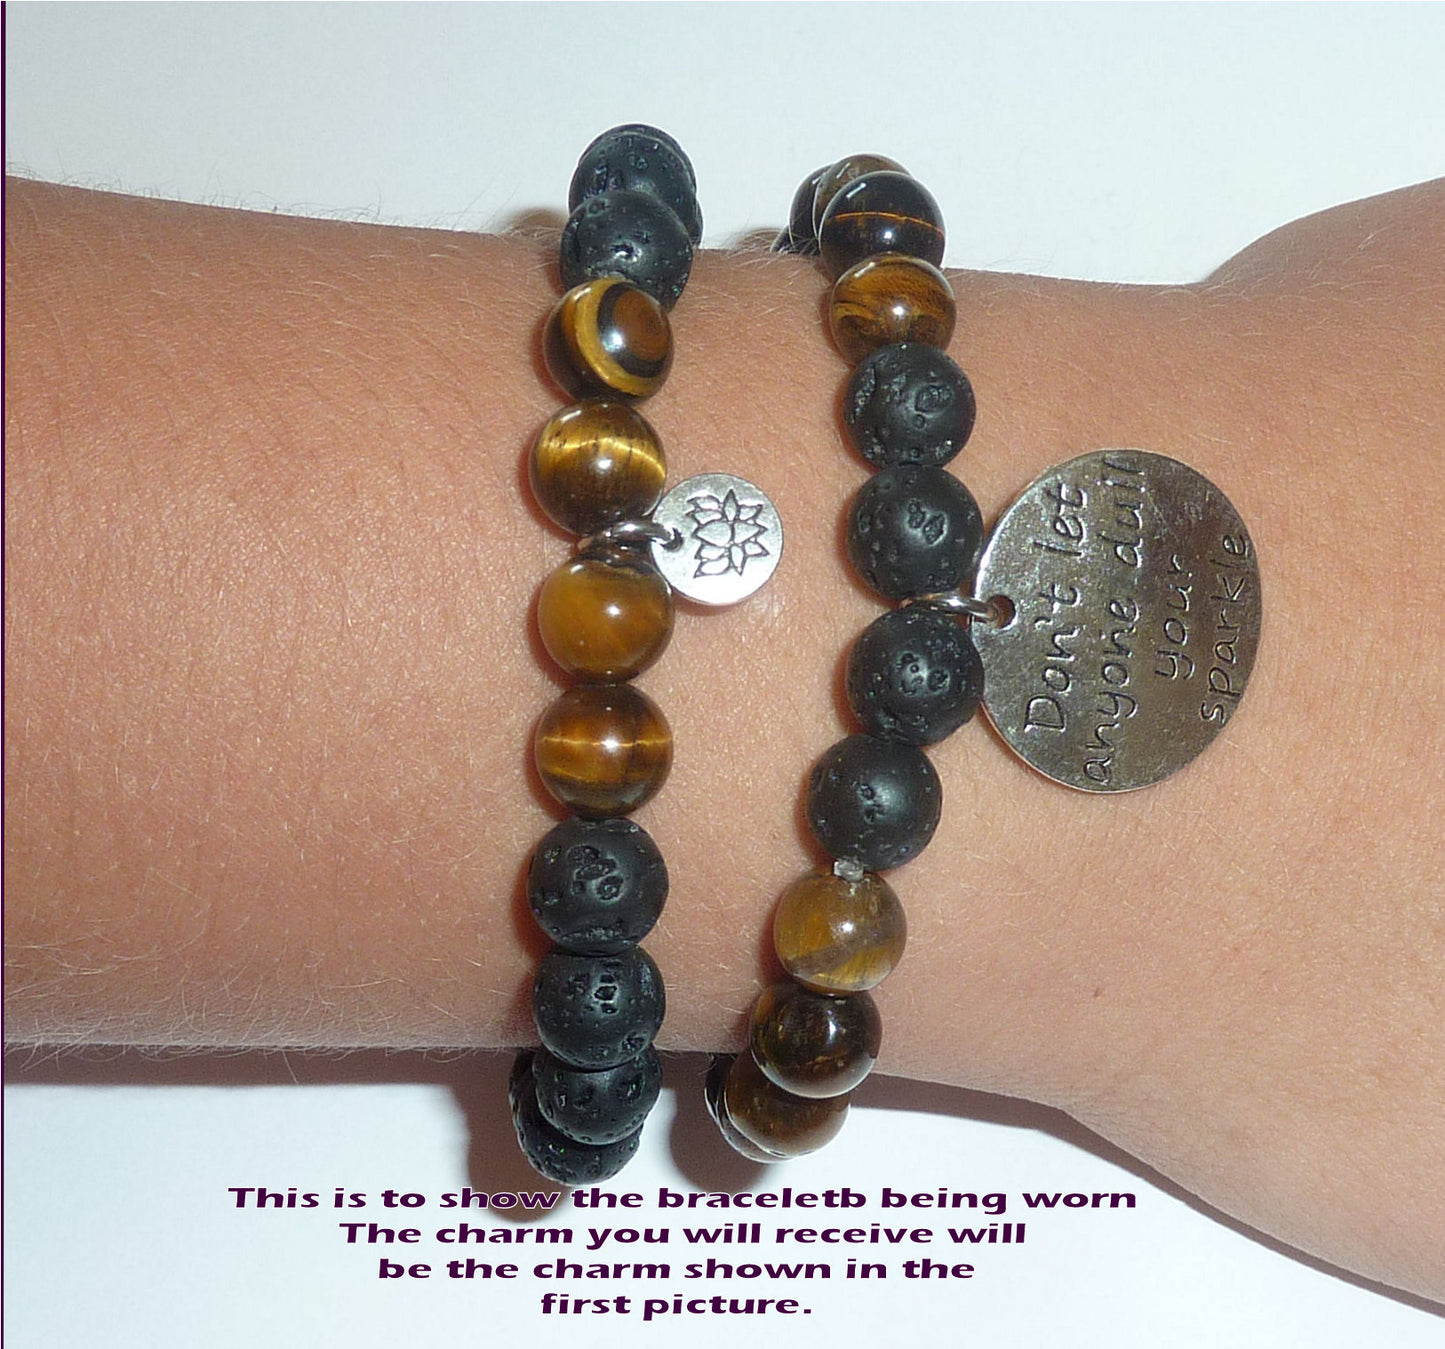 With God All Things Are Possible - Women's Tiger Eye & Black Lava Diffuser Yoga Beads Charm Stretch Bracelet Gift Set